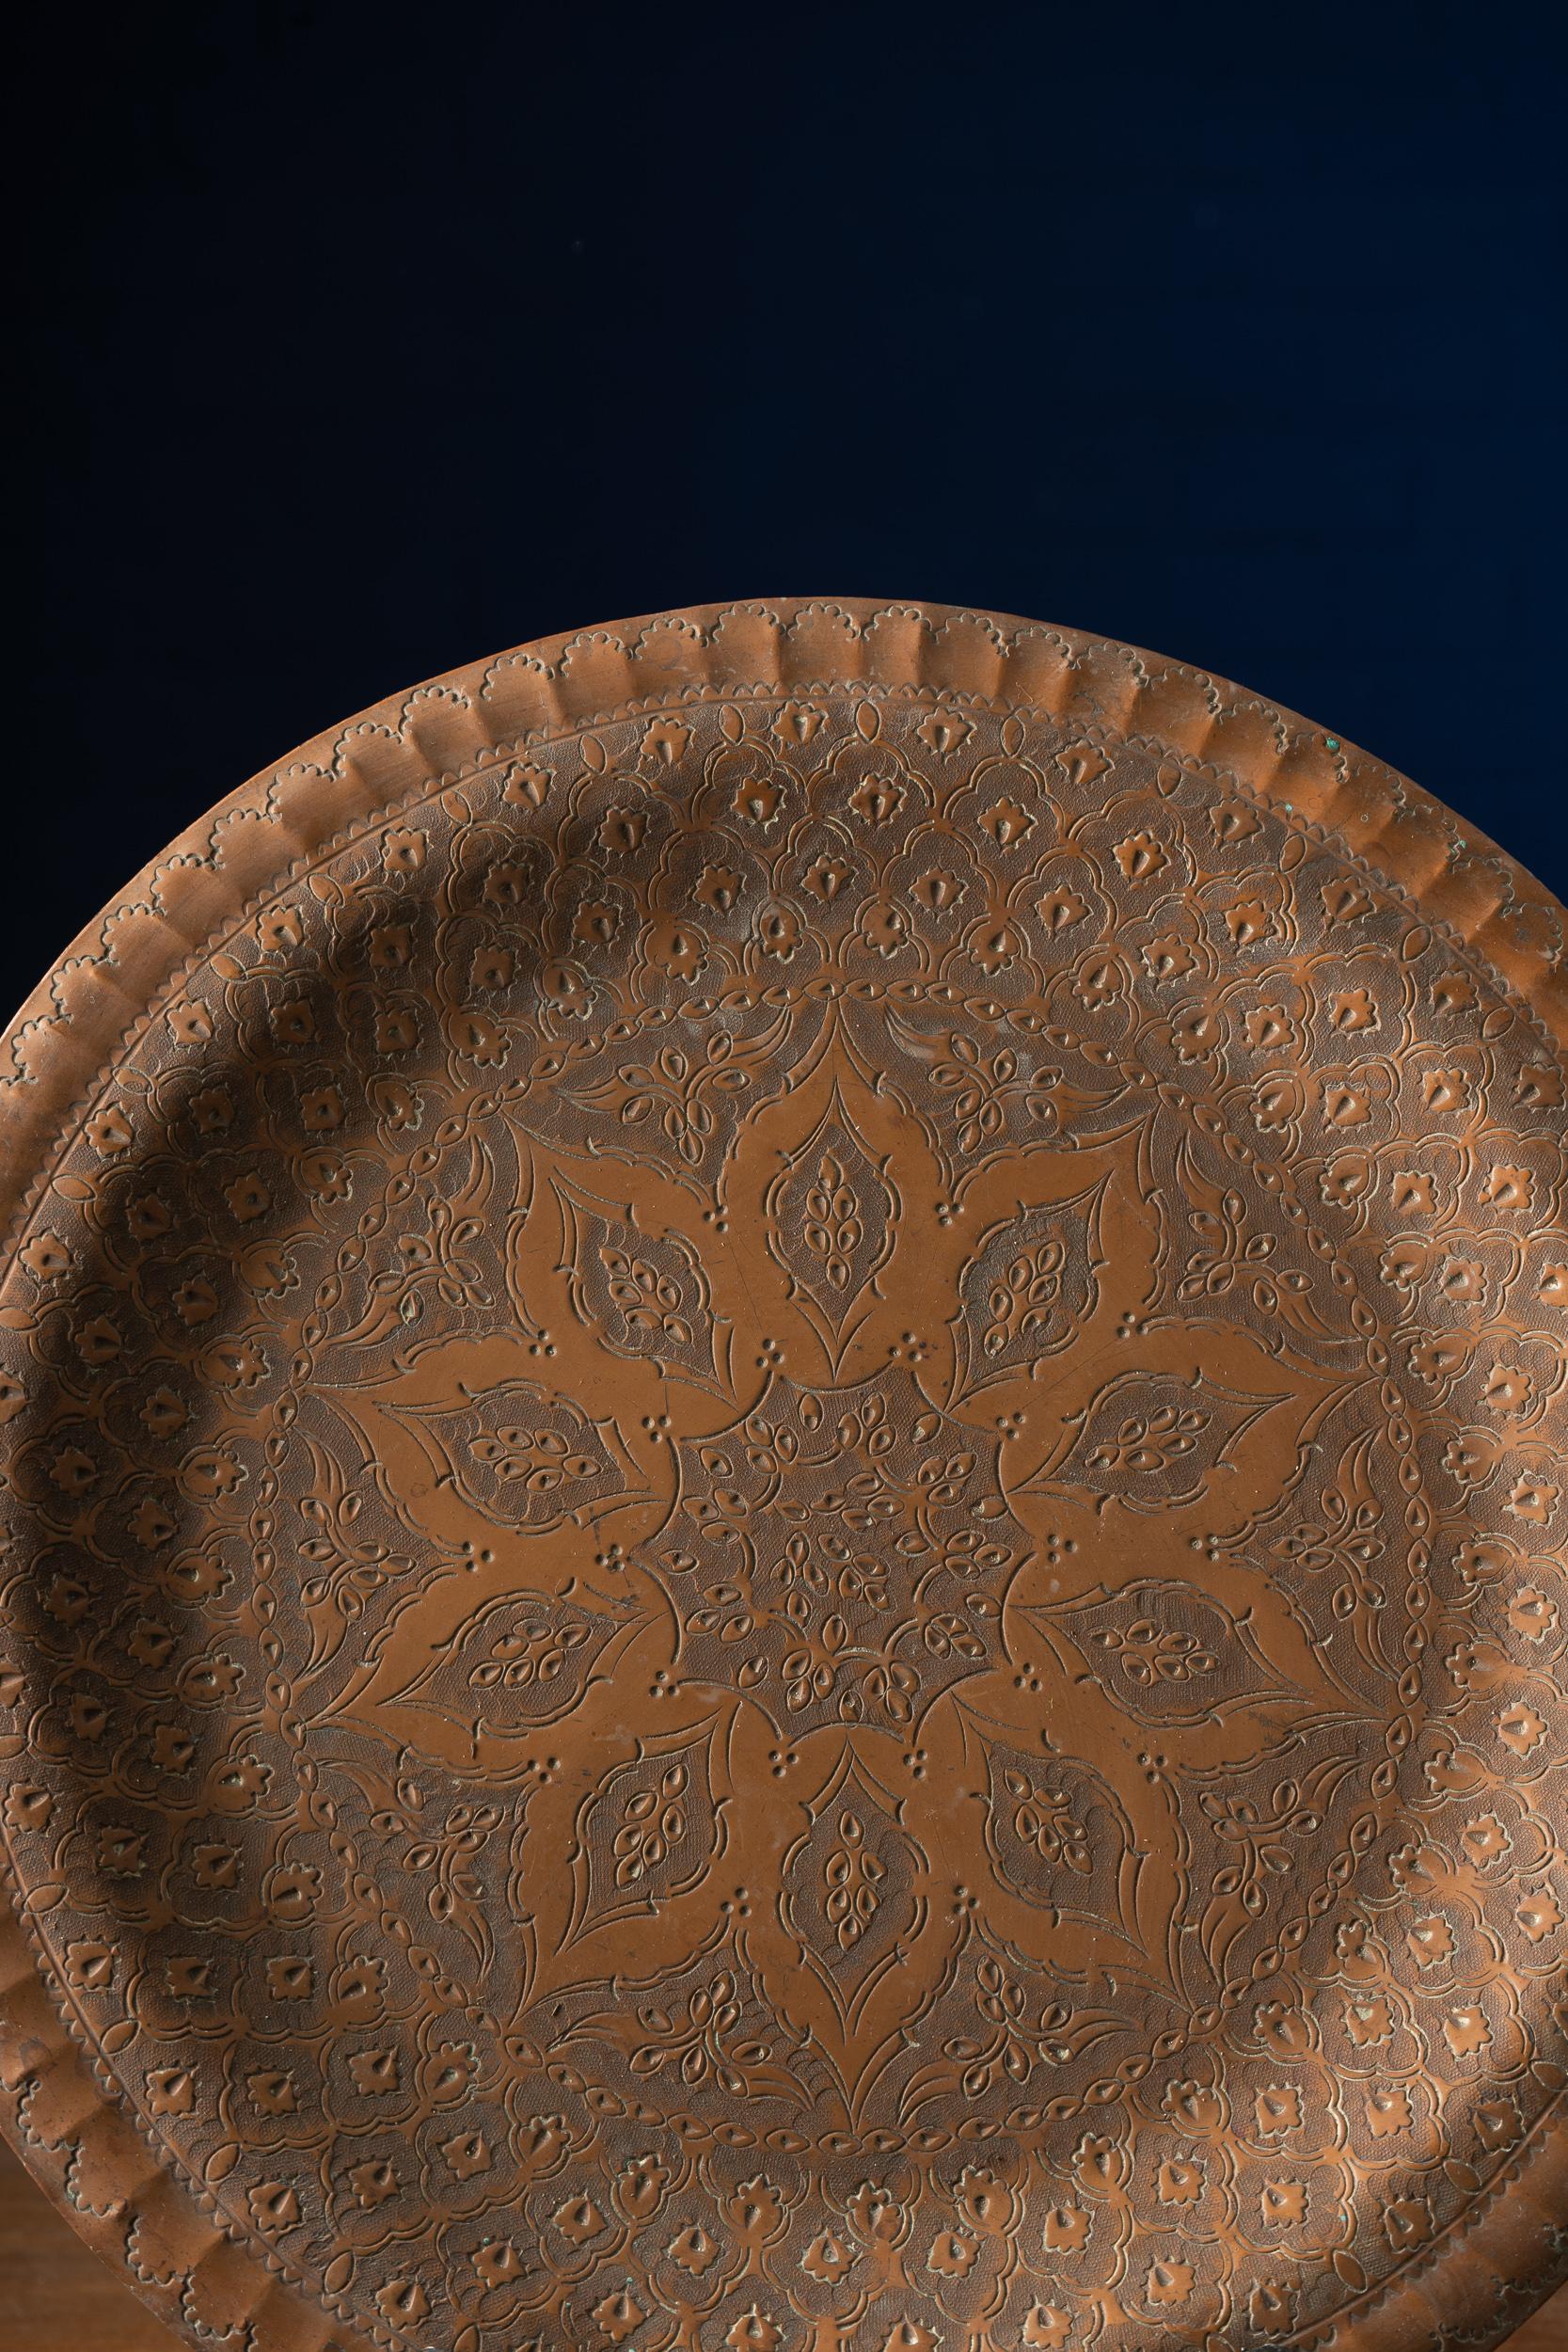 19th Century 19th C., Decorative Metal Plate with Ornaments